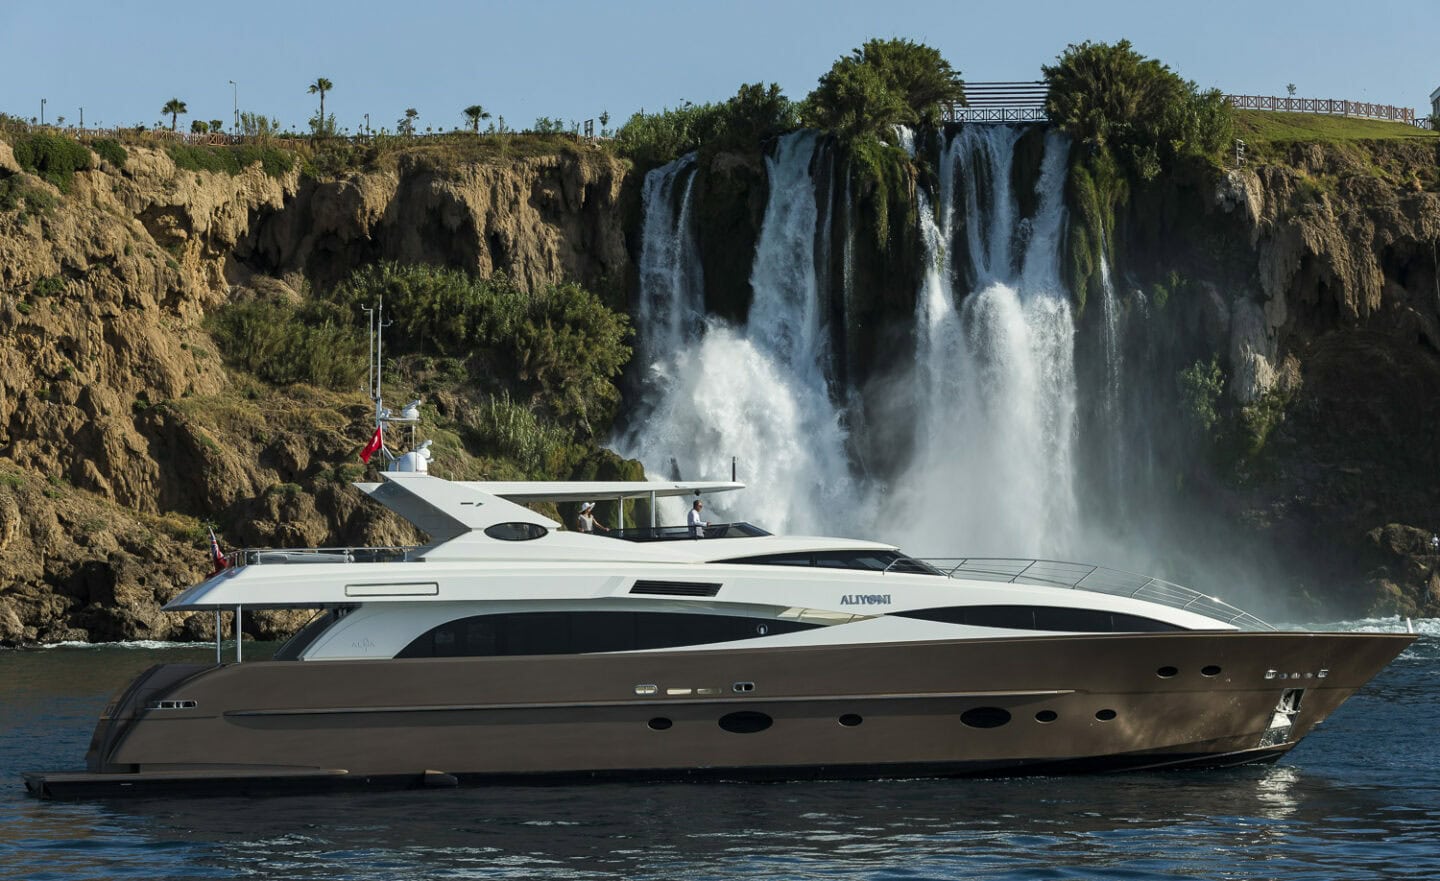 Alia Yachts ALIYONI sin front of a waterfall